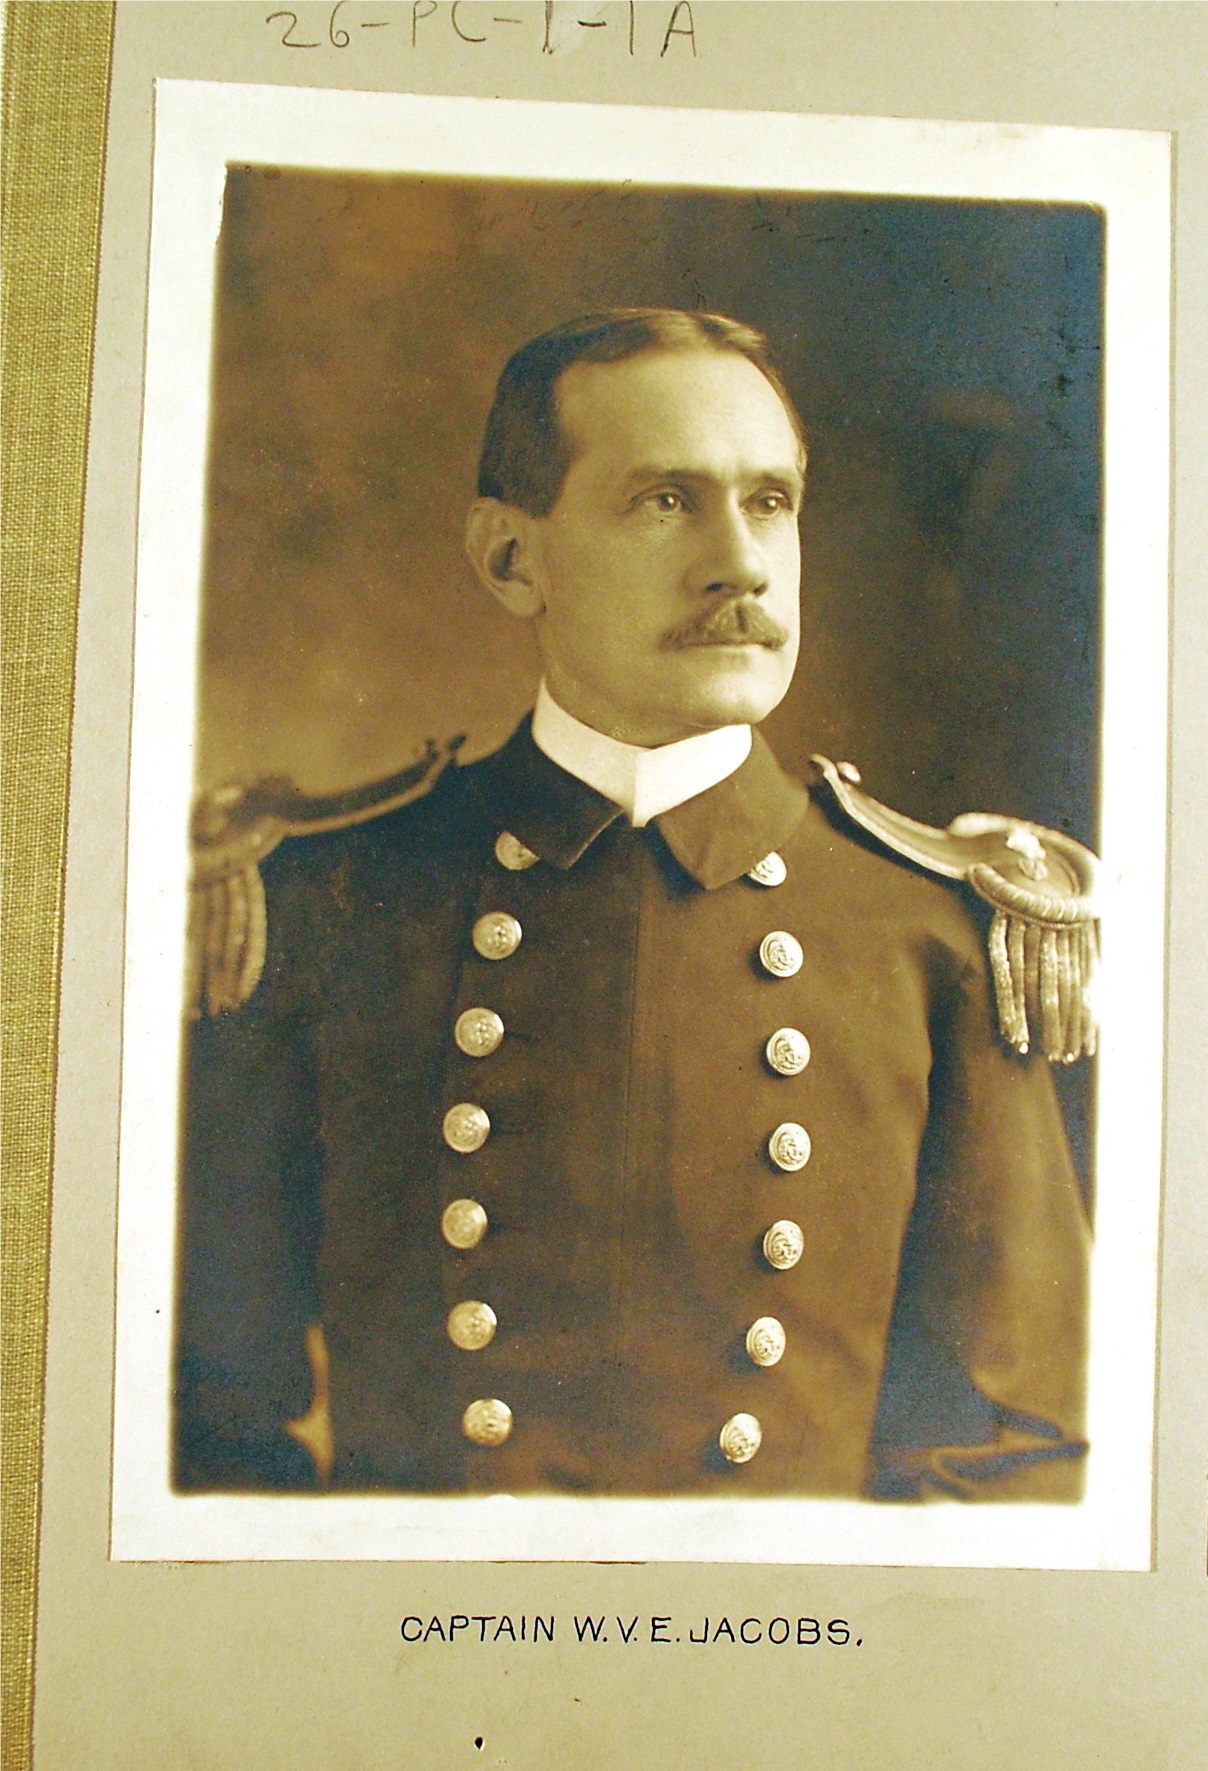 Rare image of another Thetis captain, William Jacobs, in official service photograph in dress uniform. (U.S. Coast Guard)